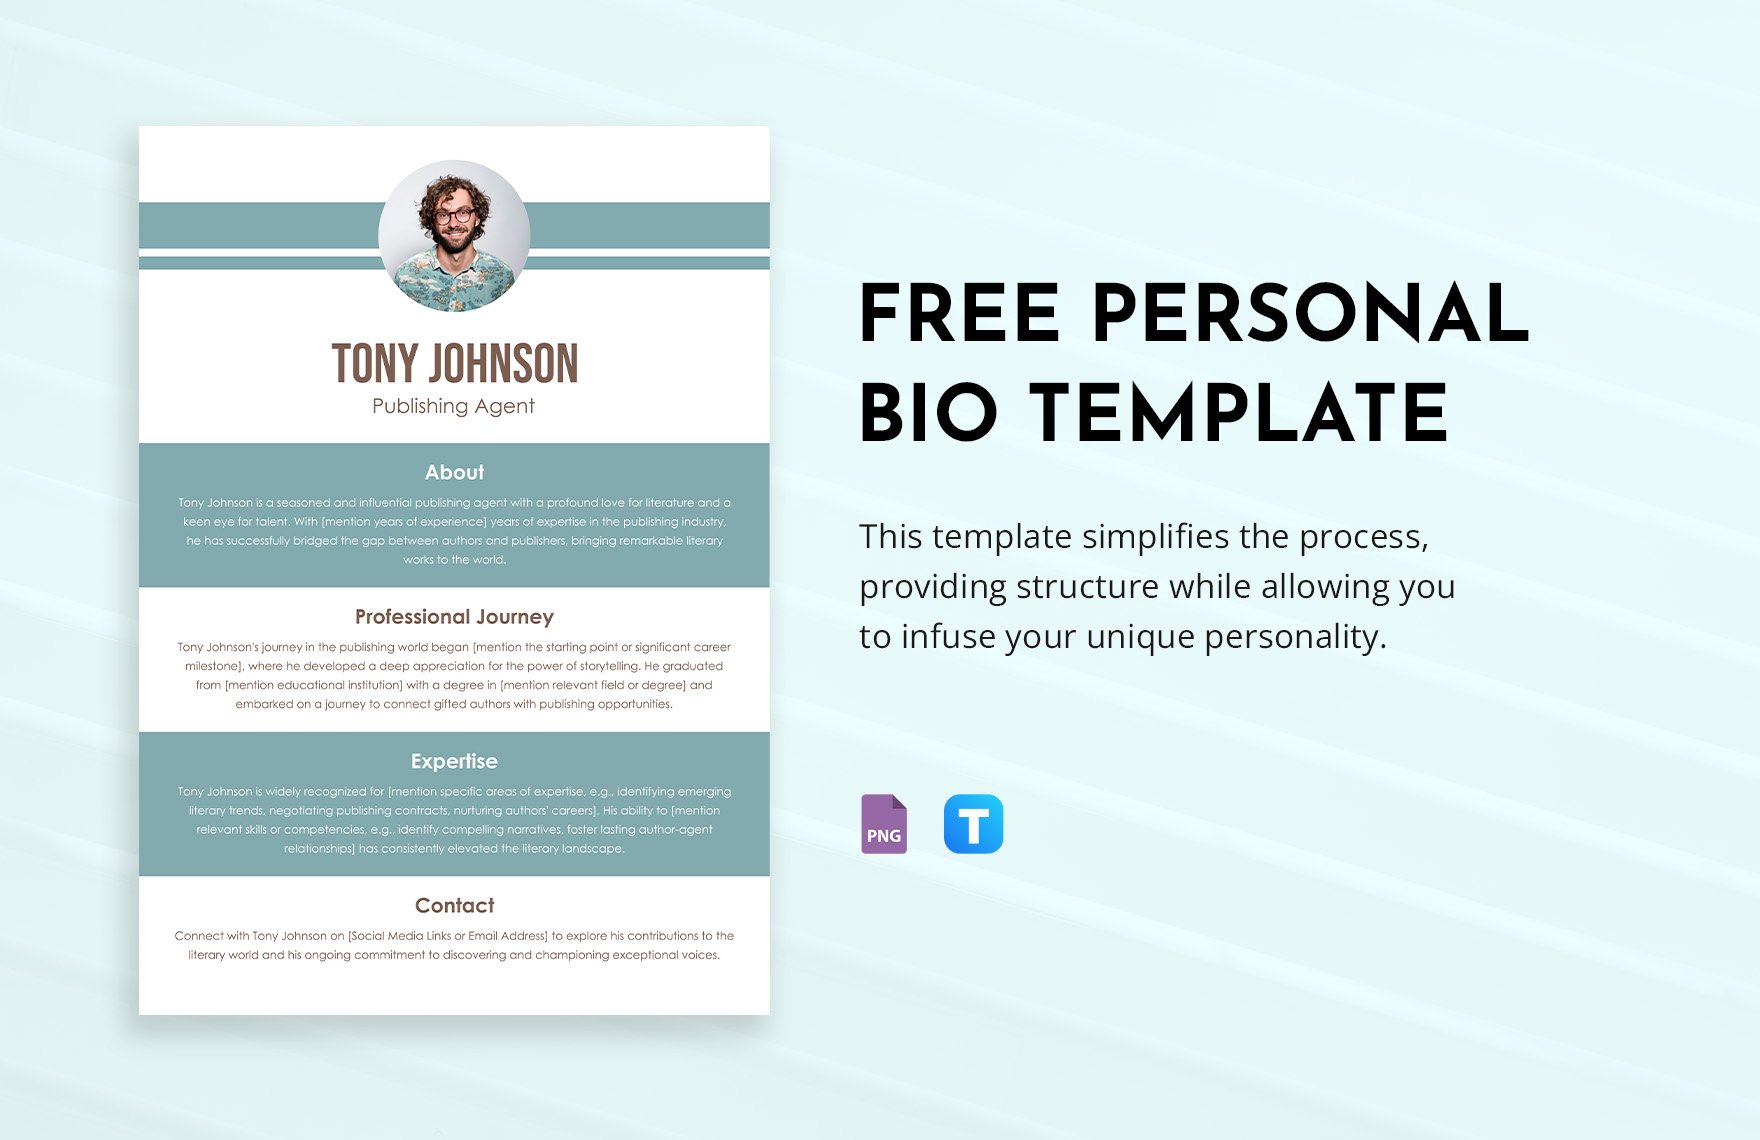 Personal Bio Template in PNG